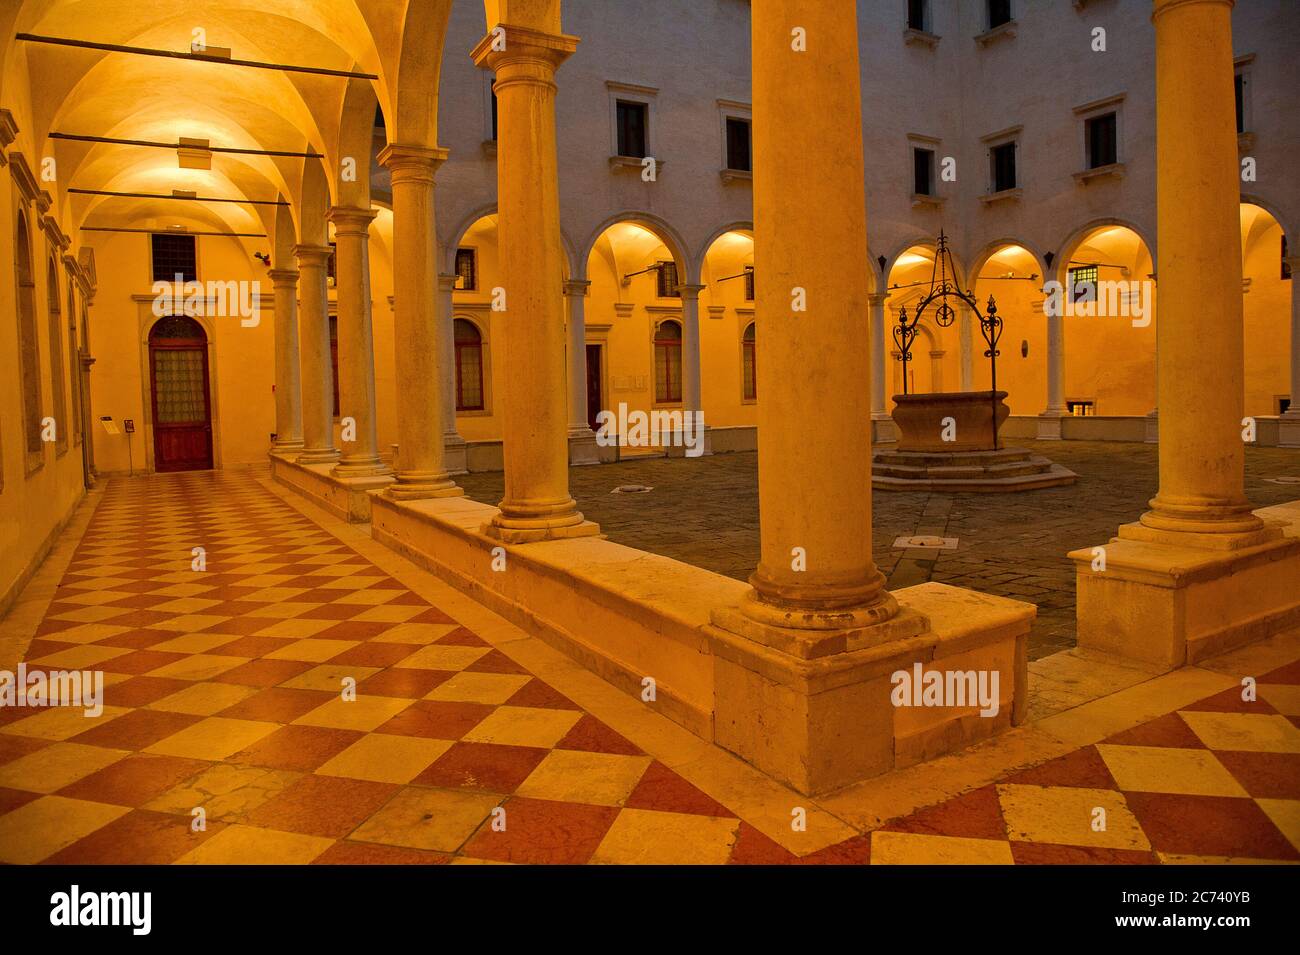 Europe, Italy, Veneto, Venice. City built on the Adriatic Sea lagoon. City of water canals instead of roads. Capital of the Serenissima Republic of Venice. UNESCO World Heritage Site. Cloister of the convent of S. Salvador Stock Photo